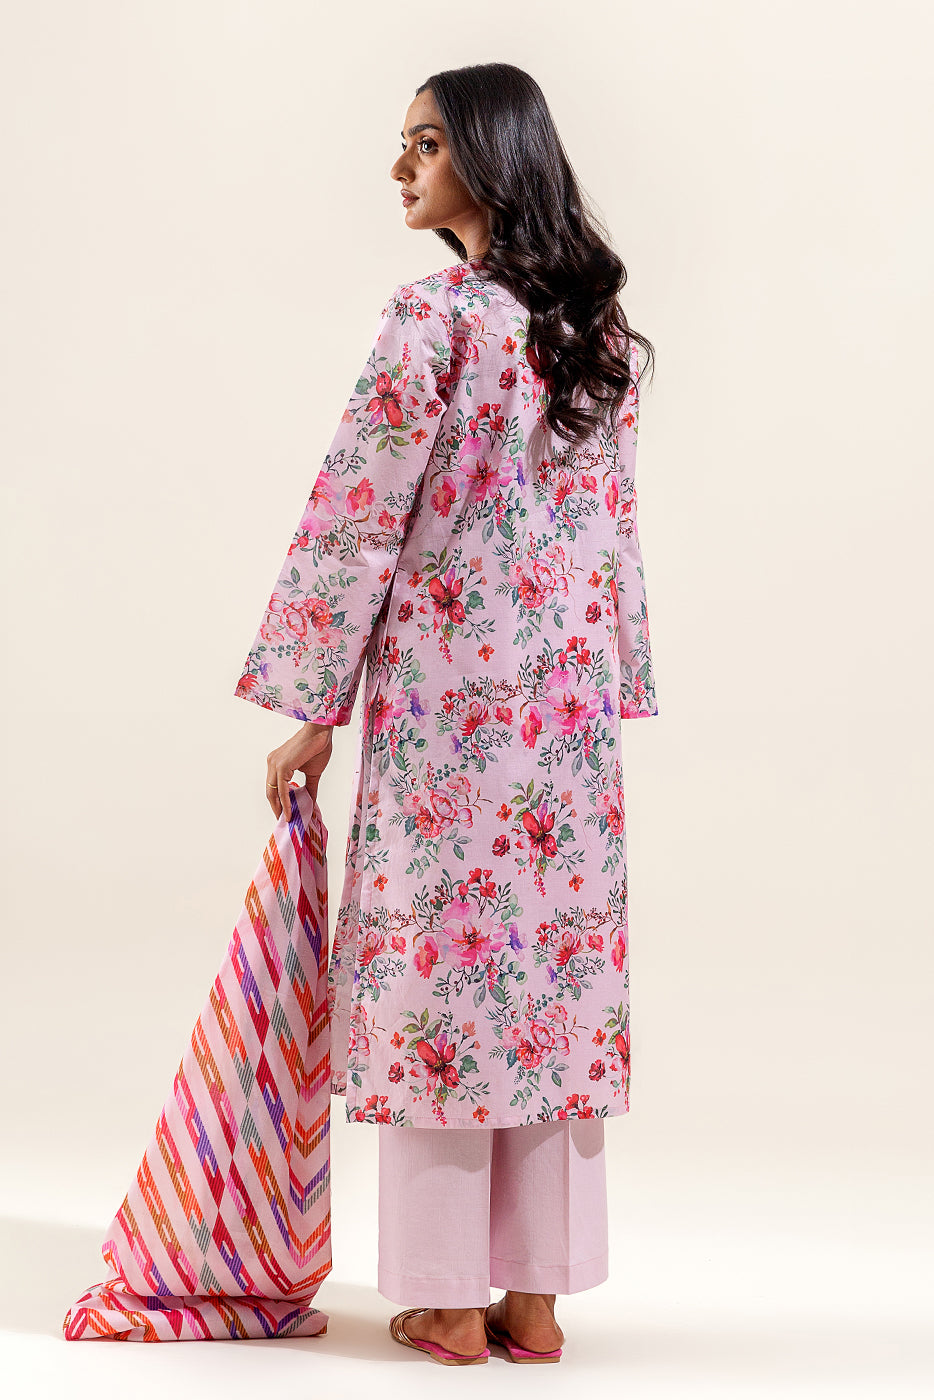 3 PIECE PRINTED SUIT-BLUSH ORCHARD (UNSTITCHED)